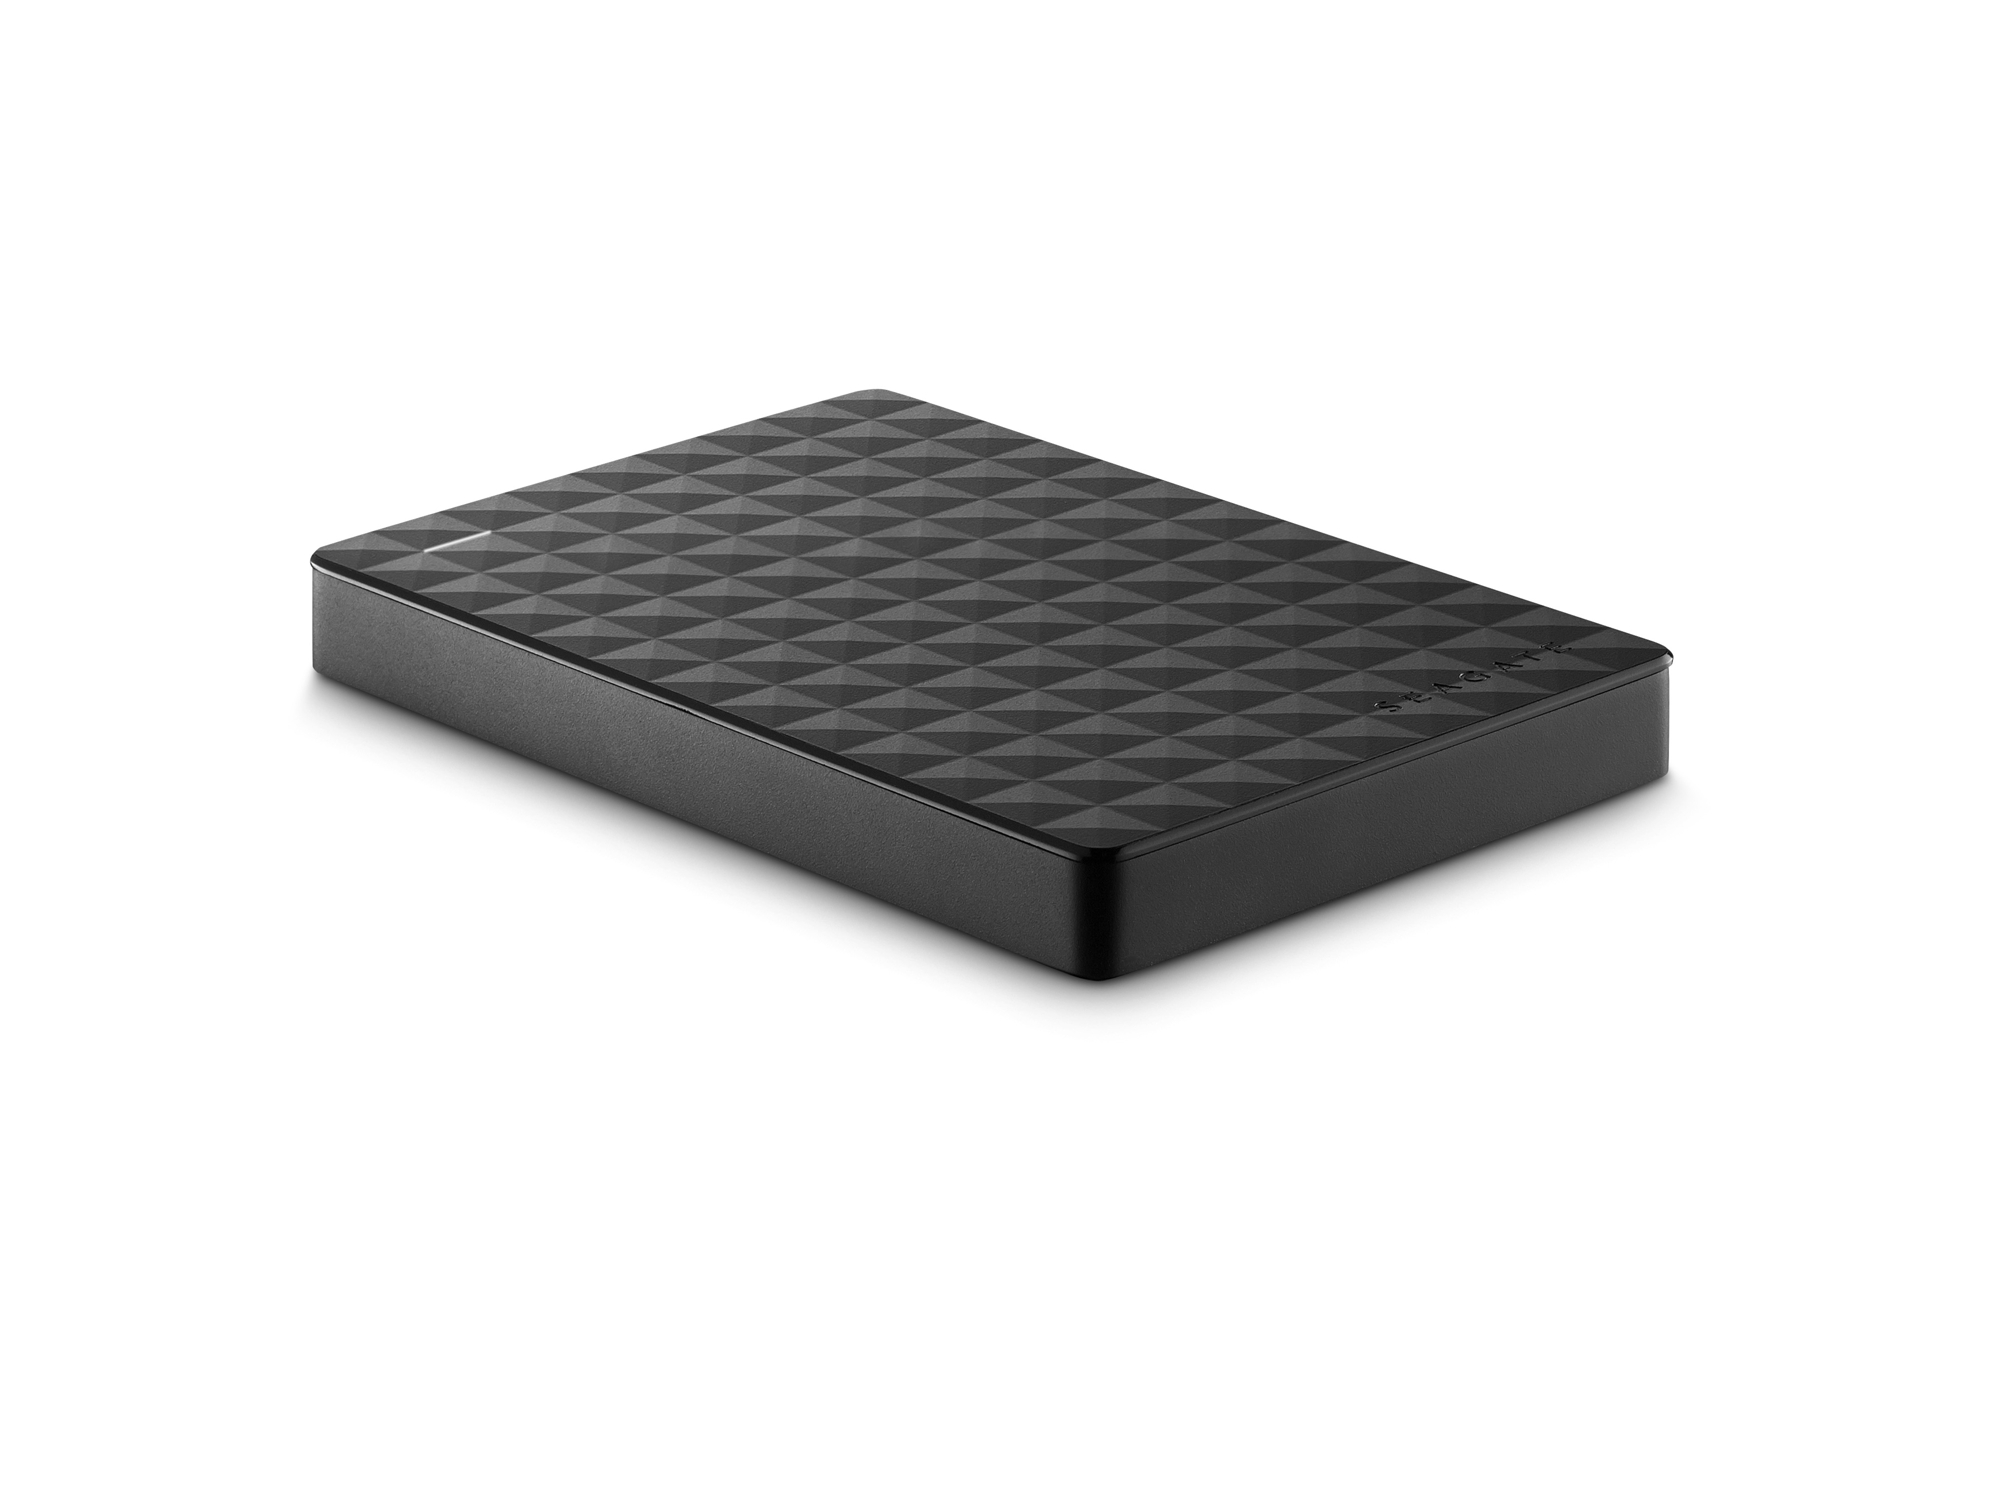 Disco HDD Externo SEAGATE Expansion (Negro - 2 TB - USB 3.0)